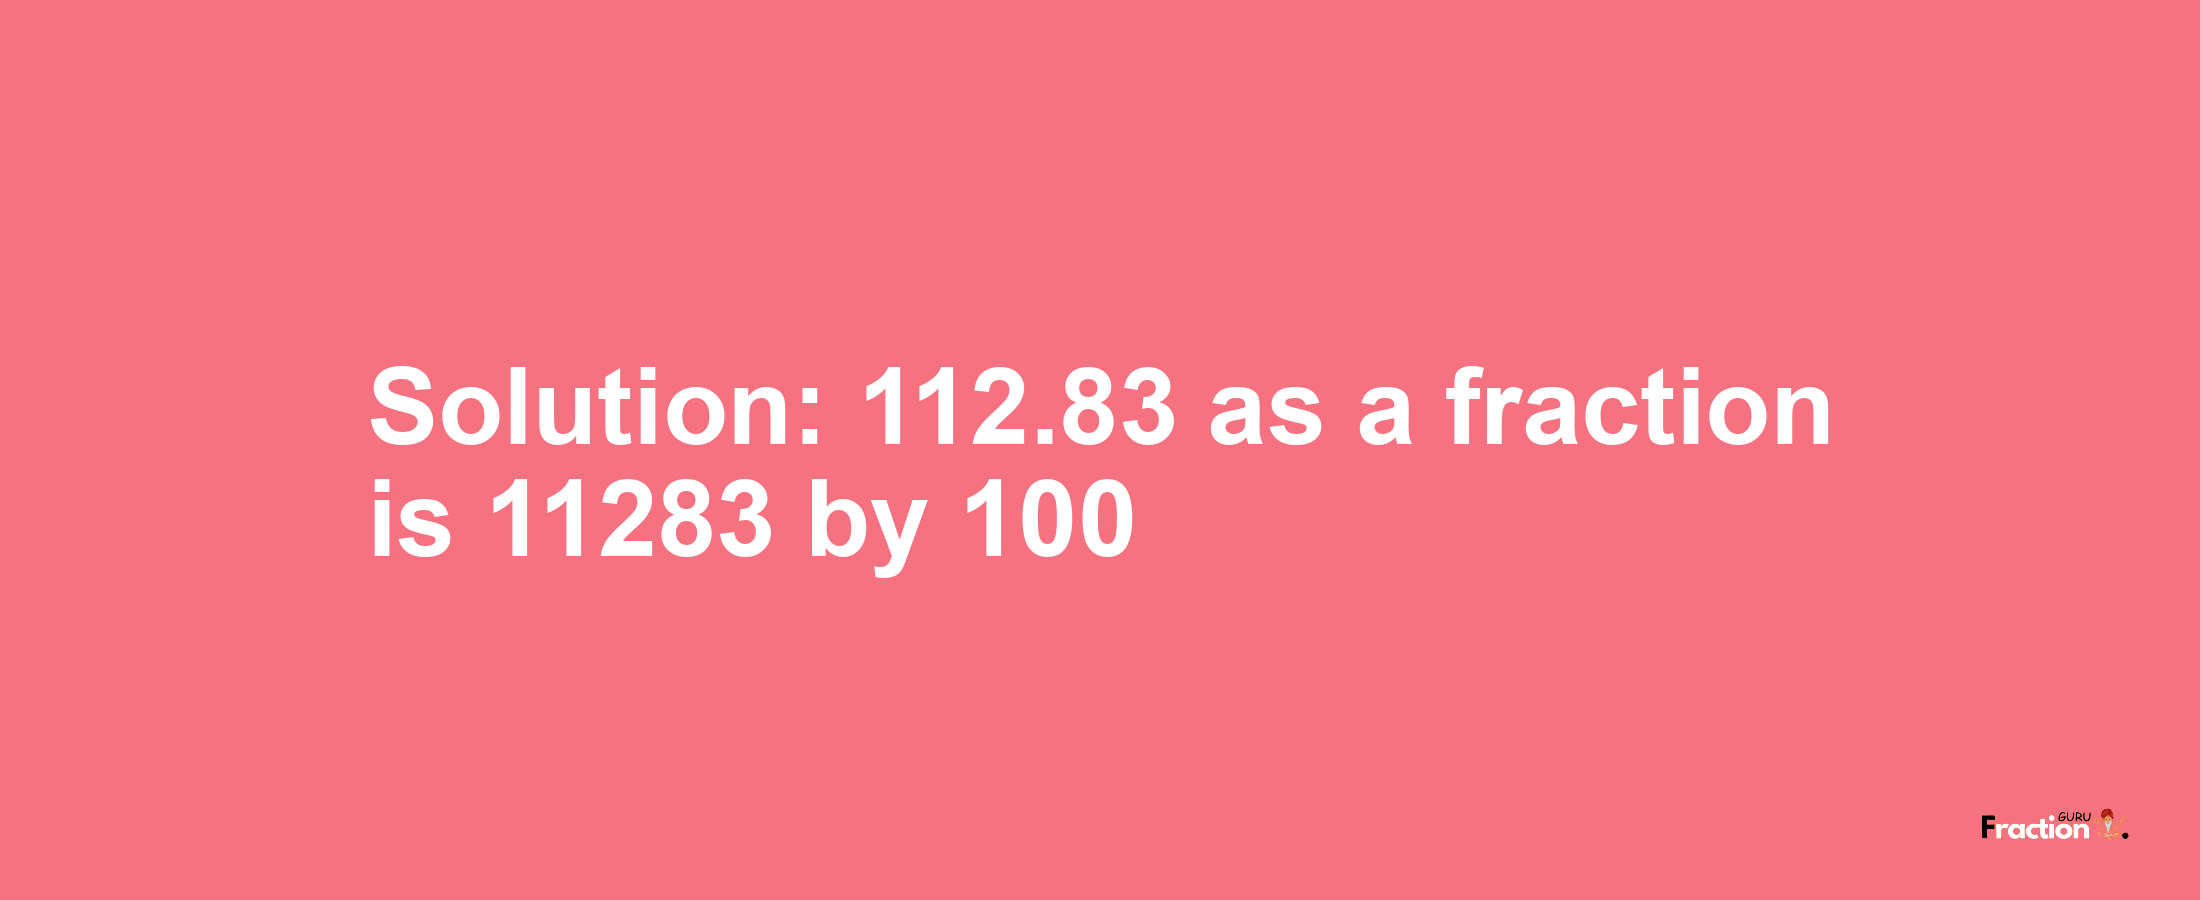 Solution:112.83 as a fraction is 11283/100